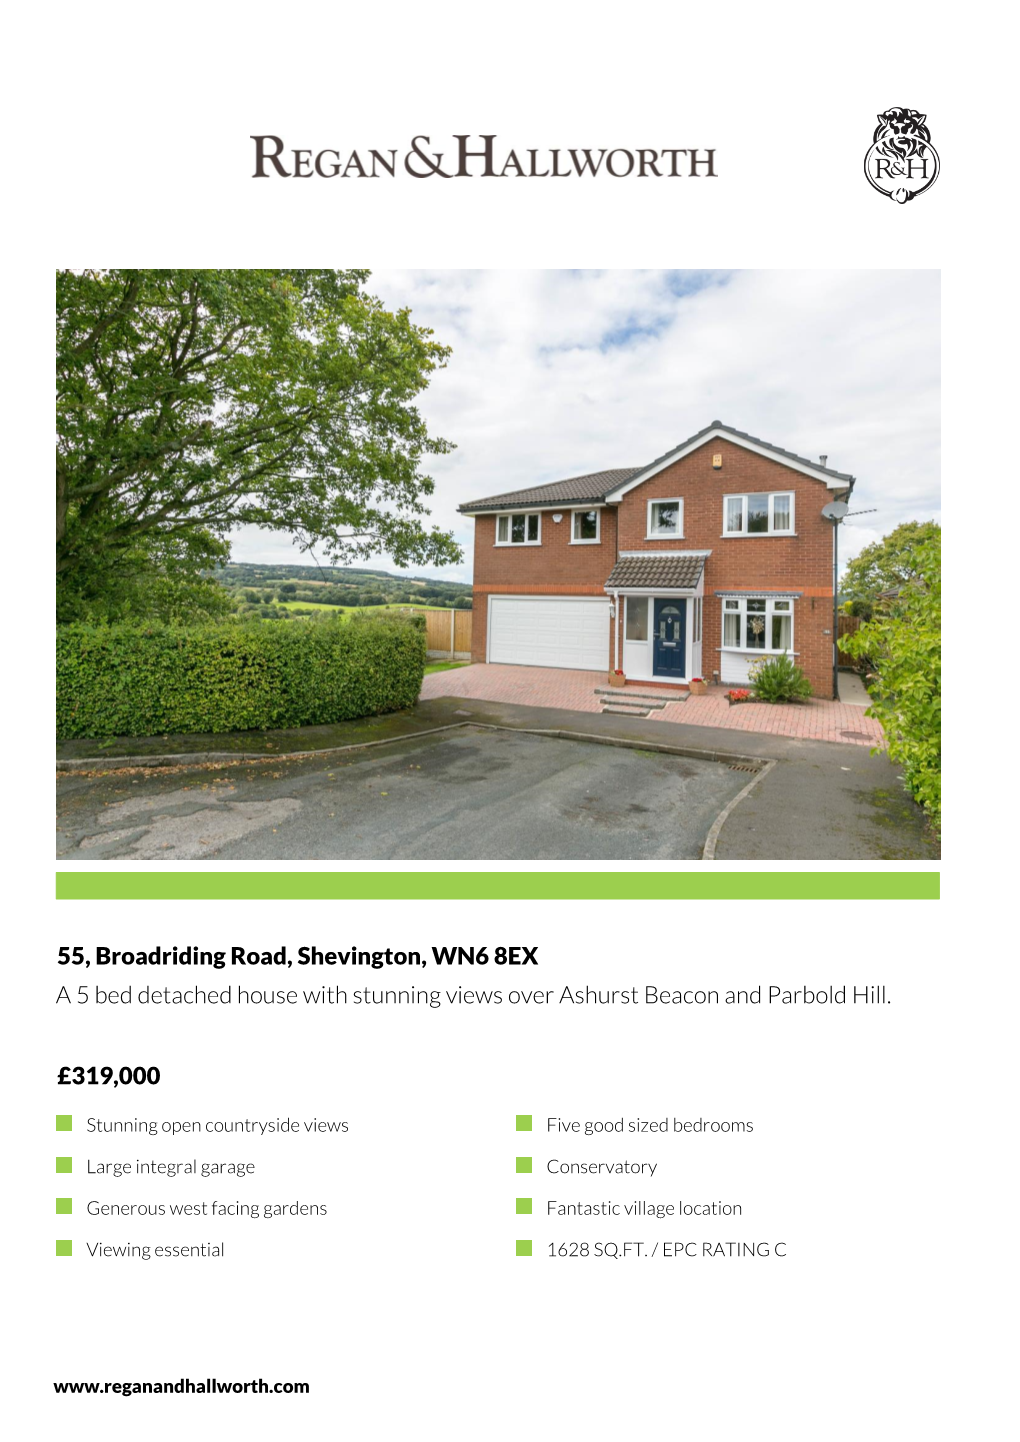 55, Broadriding Road, Shevington, WN6 8EX a 5 Bed Detached House with Stunning Views Over Ashurst Beacon and Parbold Hill